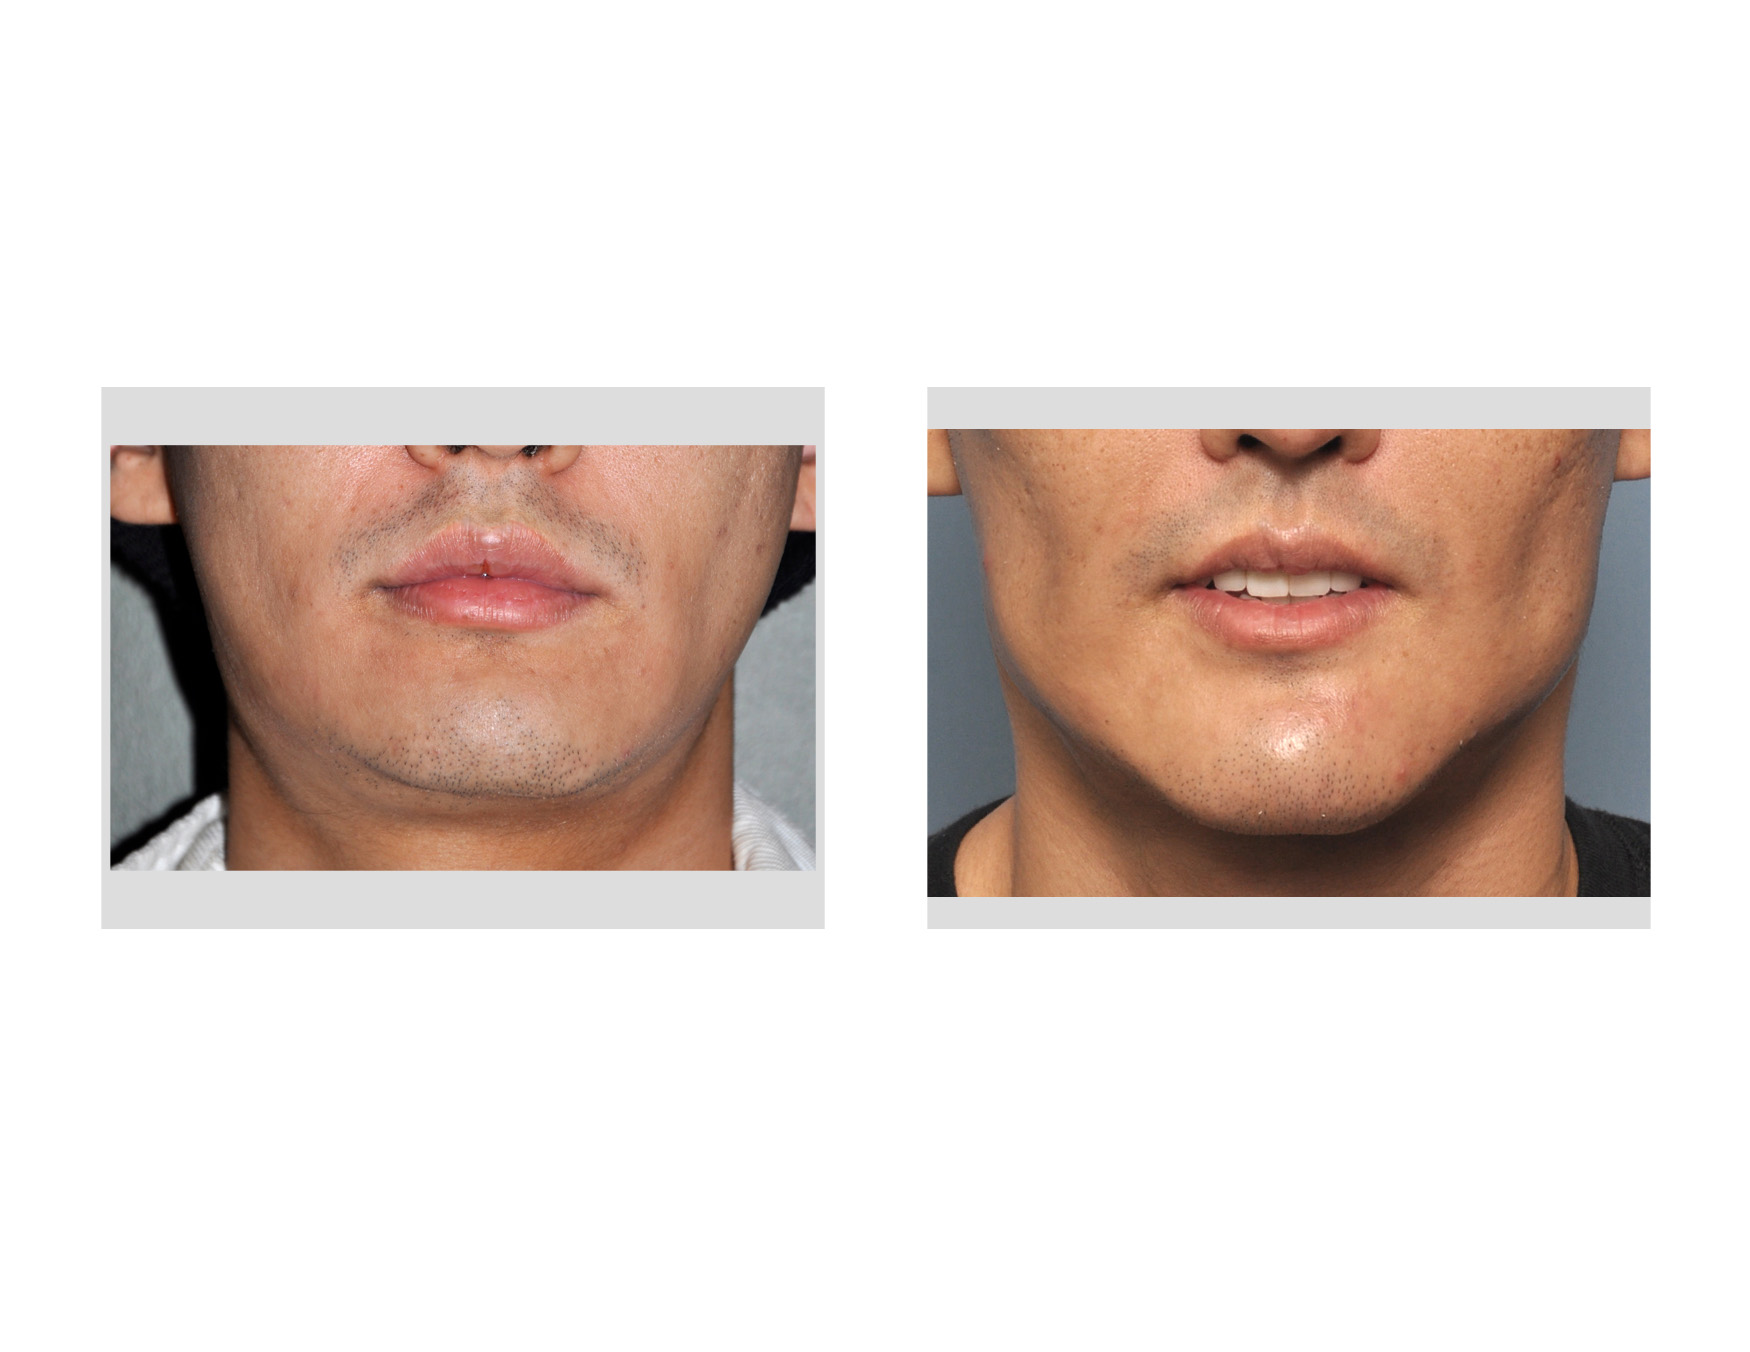 Custom-Jawline-Implant-result-frofnt-view-Dr-Barry-Eppley-Indianapolis.jpg